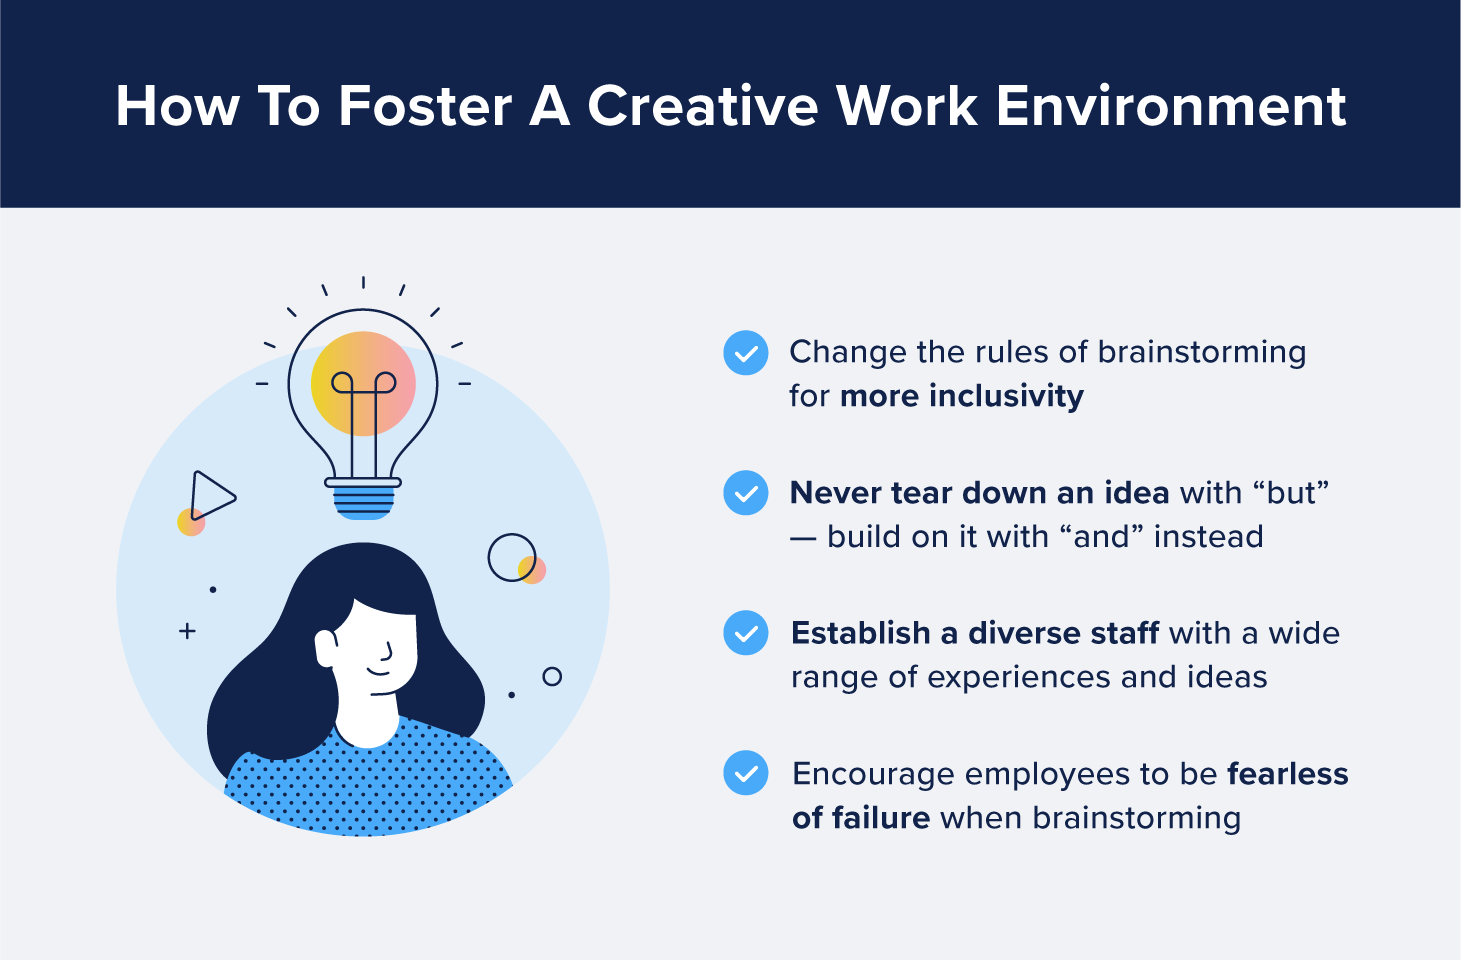 Four tips to foster a creative work environment